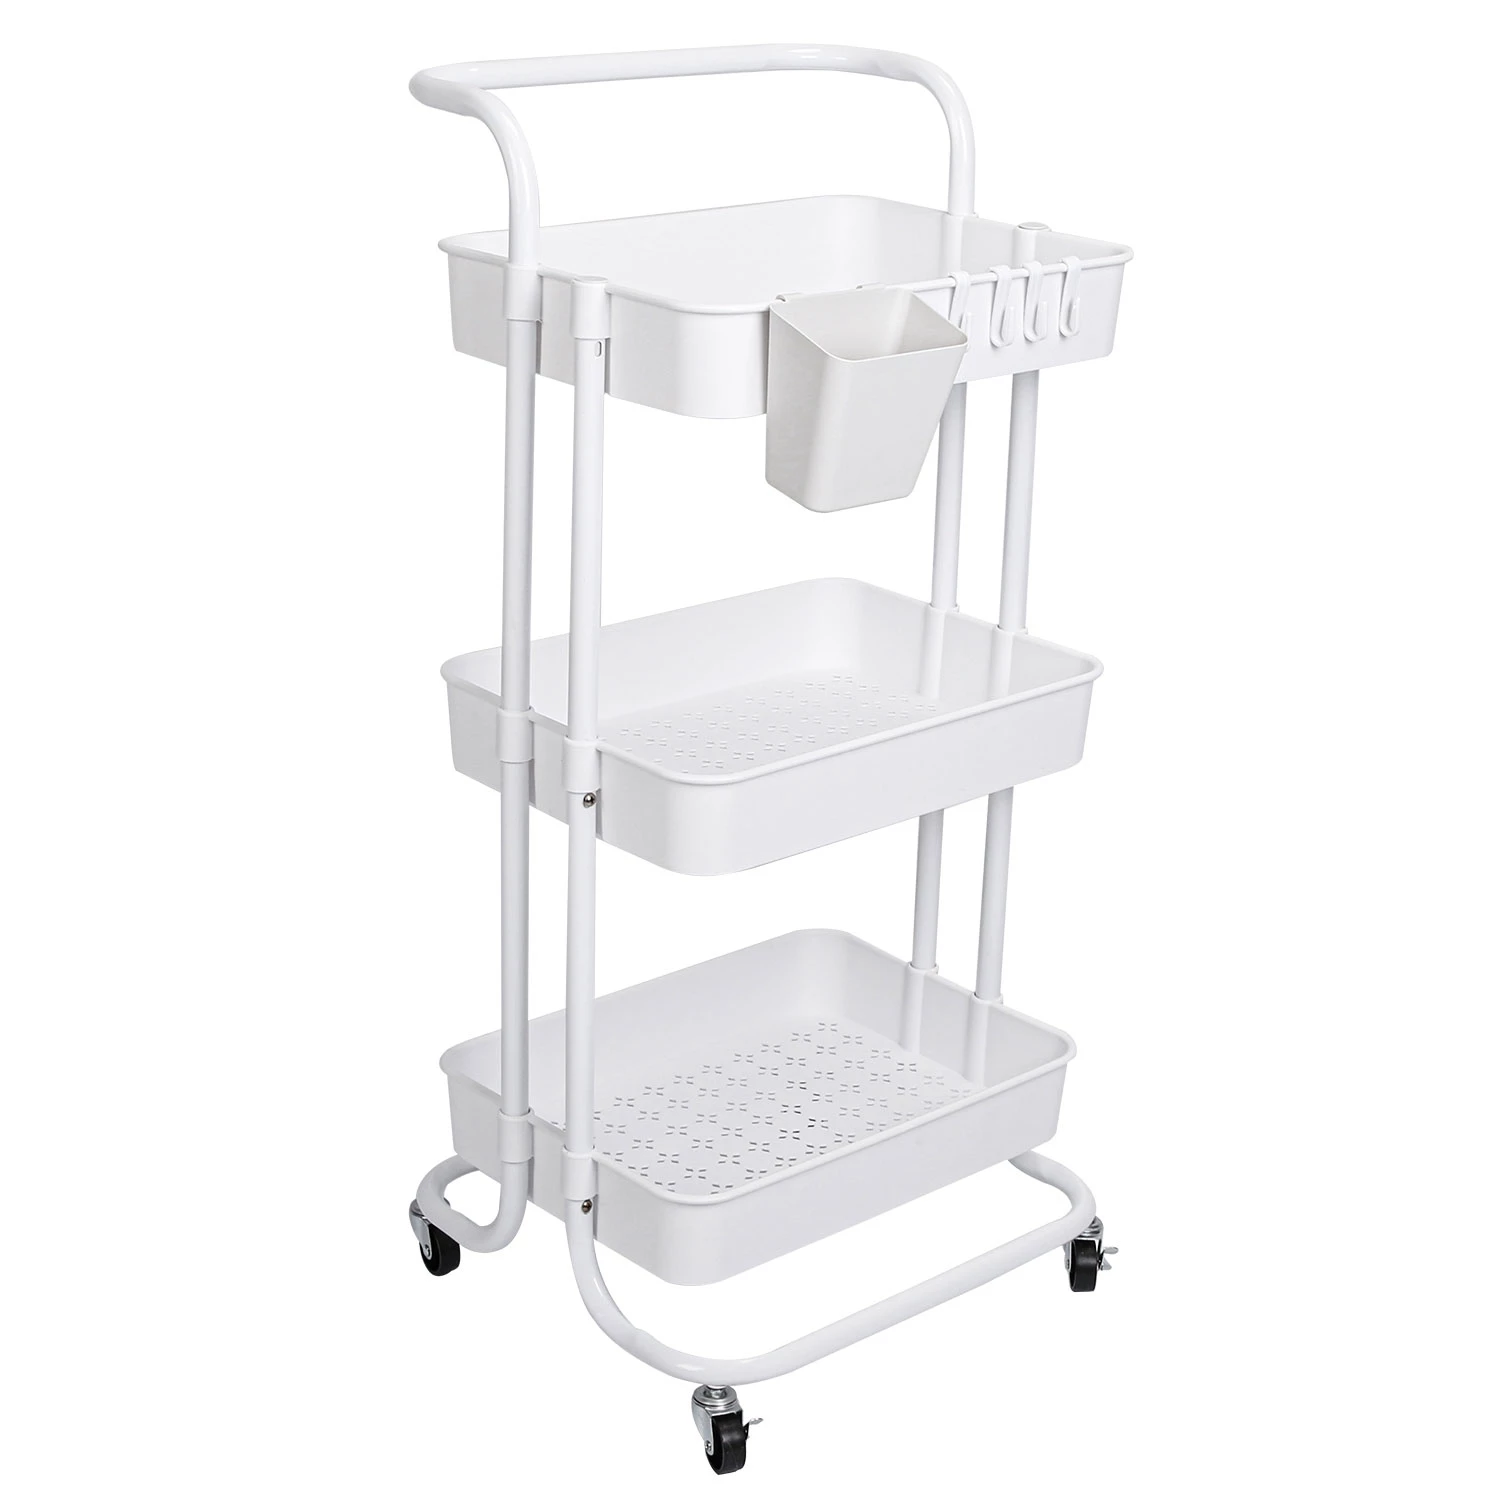 3 Tier Rolling Utility Cart Movable Storage Organizer with Mesh Baskets Lockable Wheels 360 Degree R